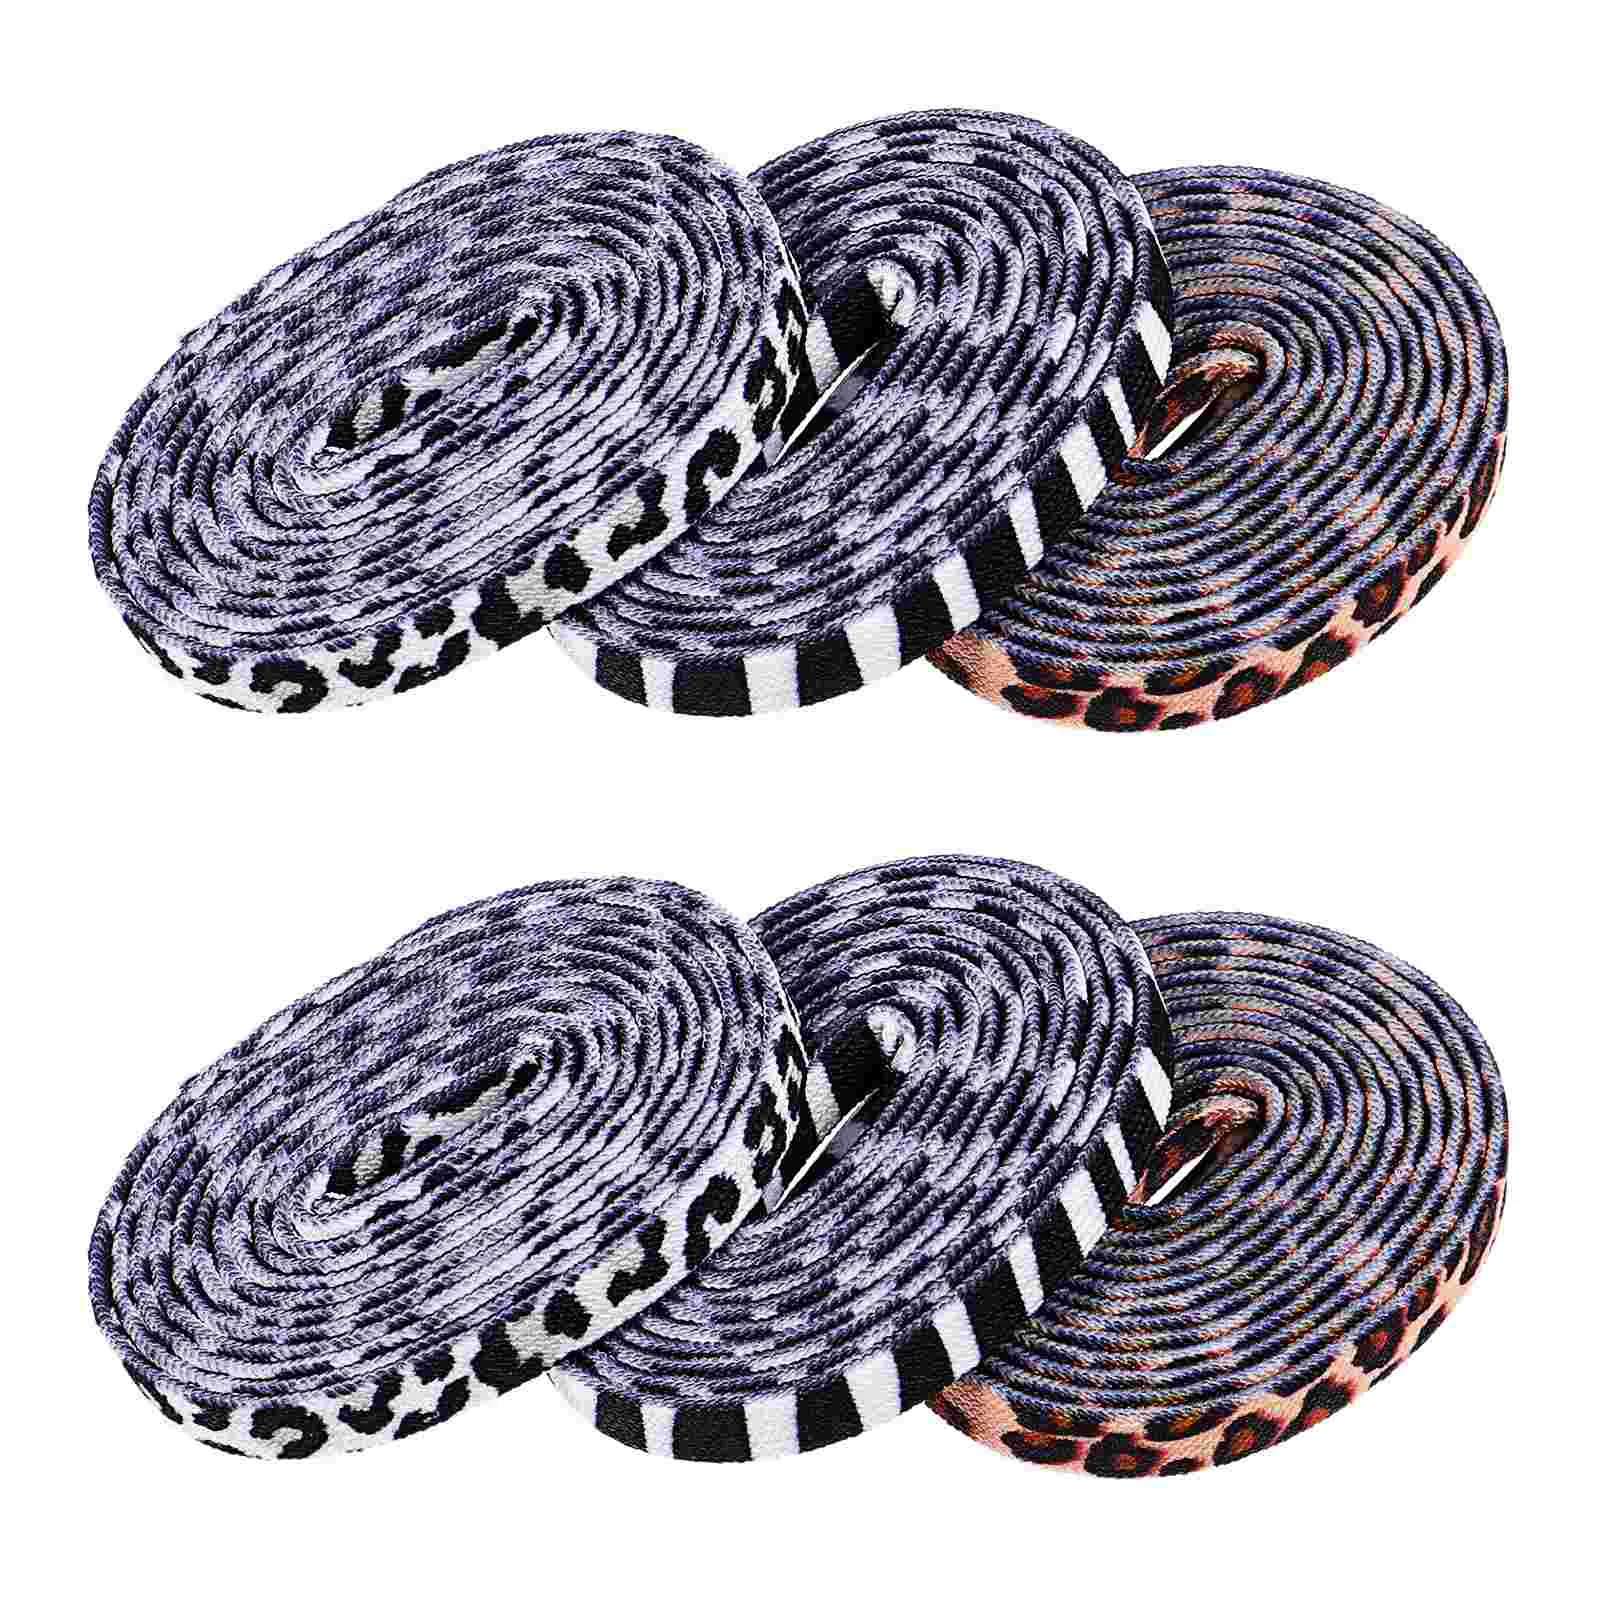 

3 Pairs Flat Shoelaces Printed Elastic Laces Premium Waxed Durable replacements for Flats Sports Shoes Sneakers Casual Shoes